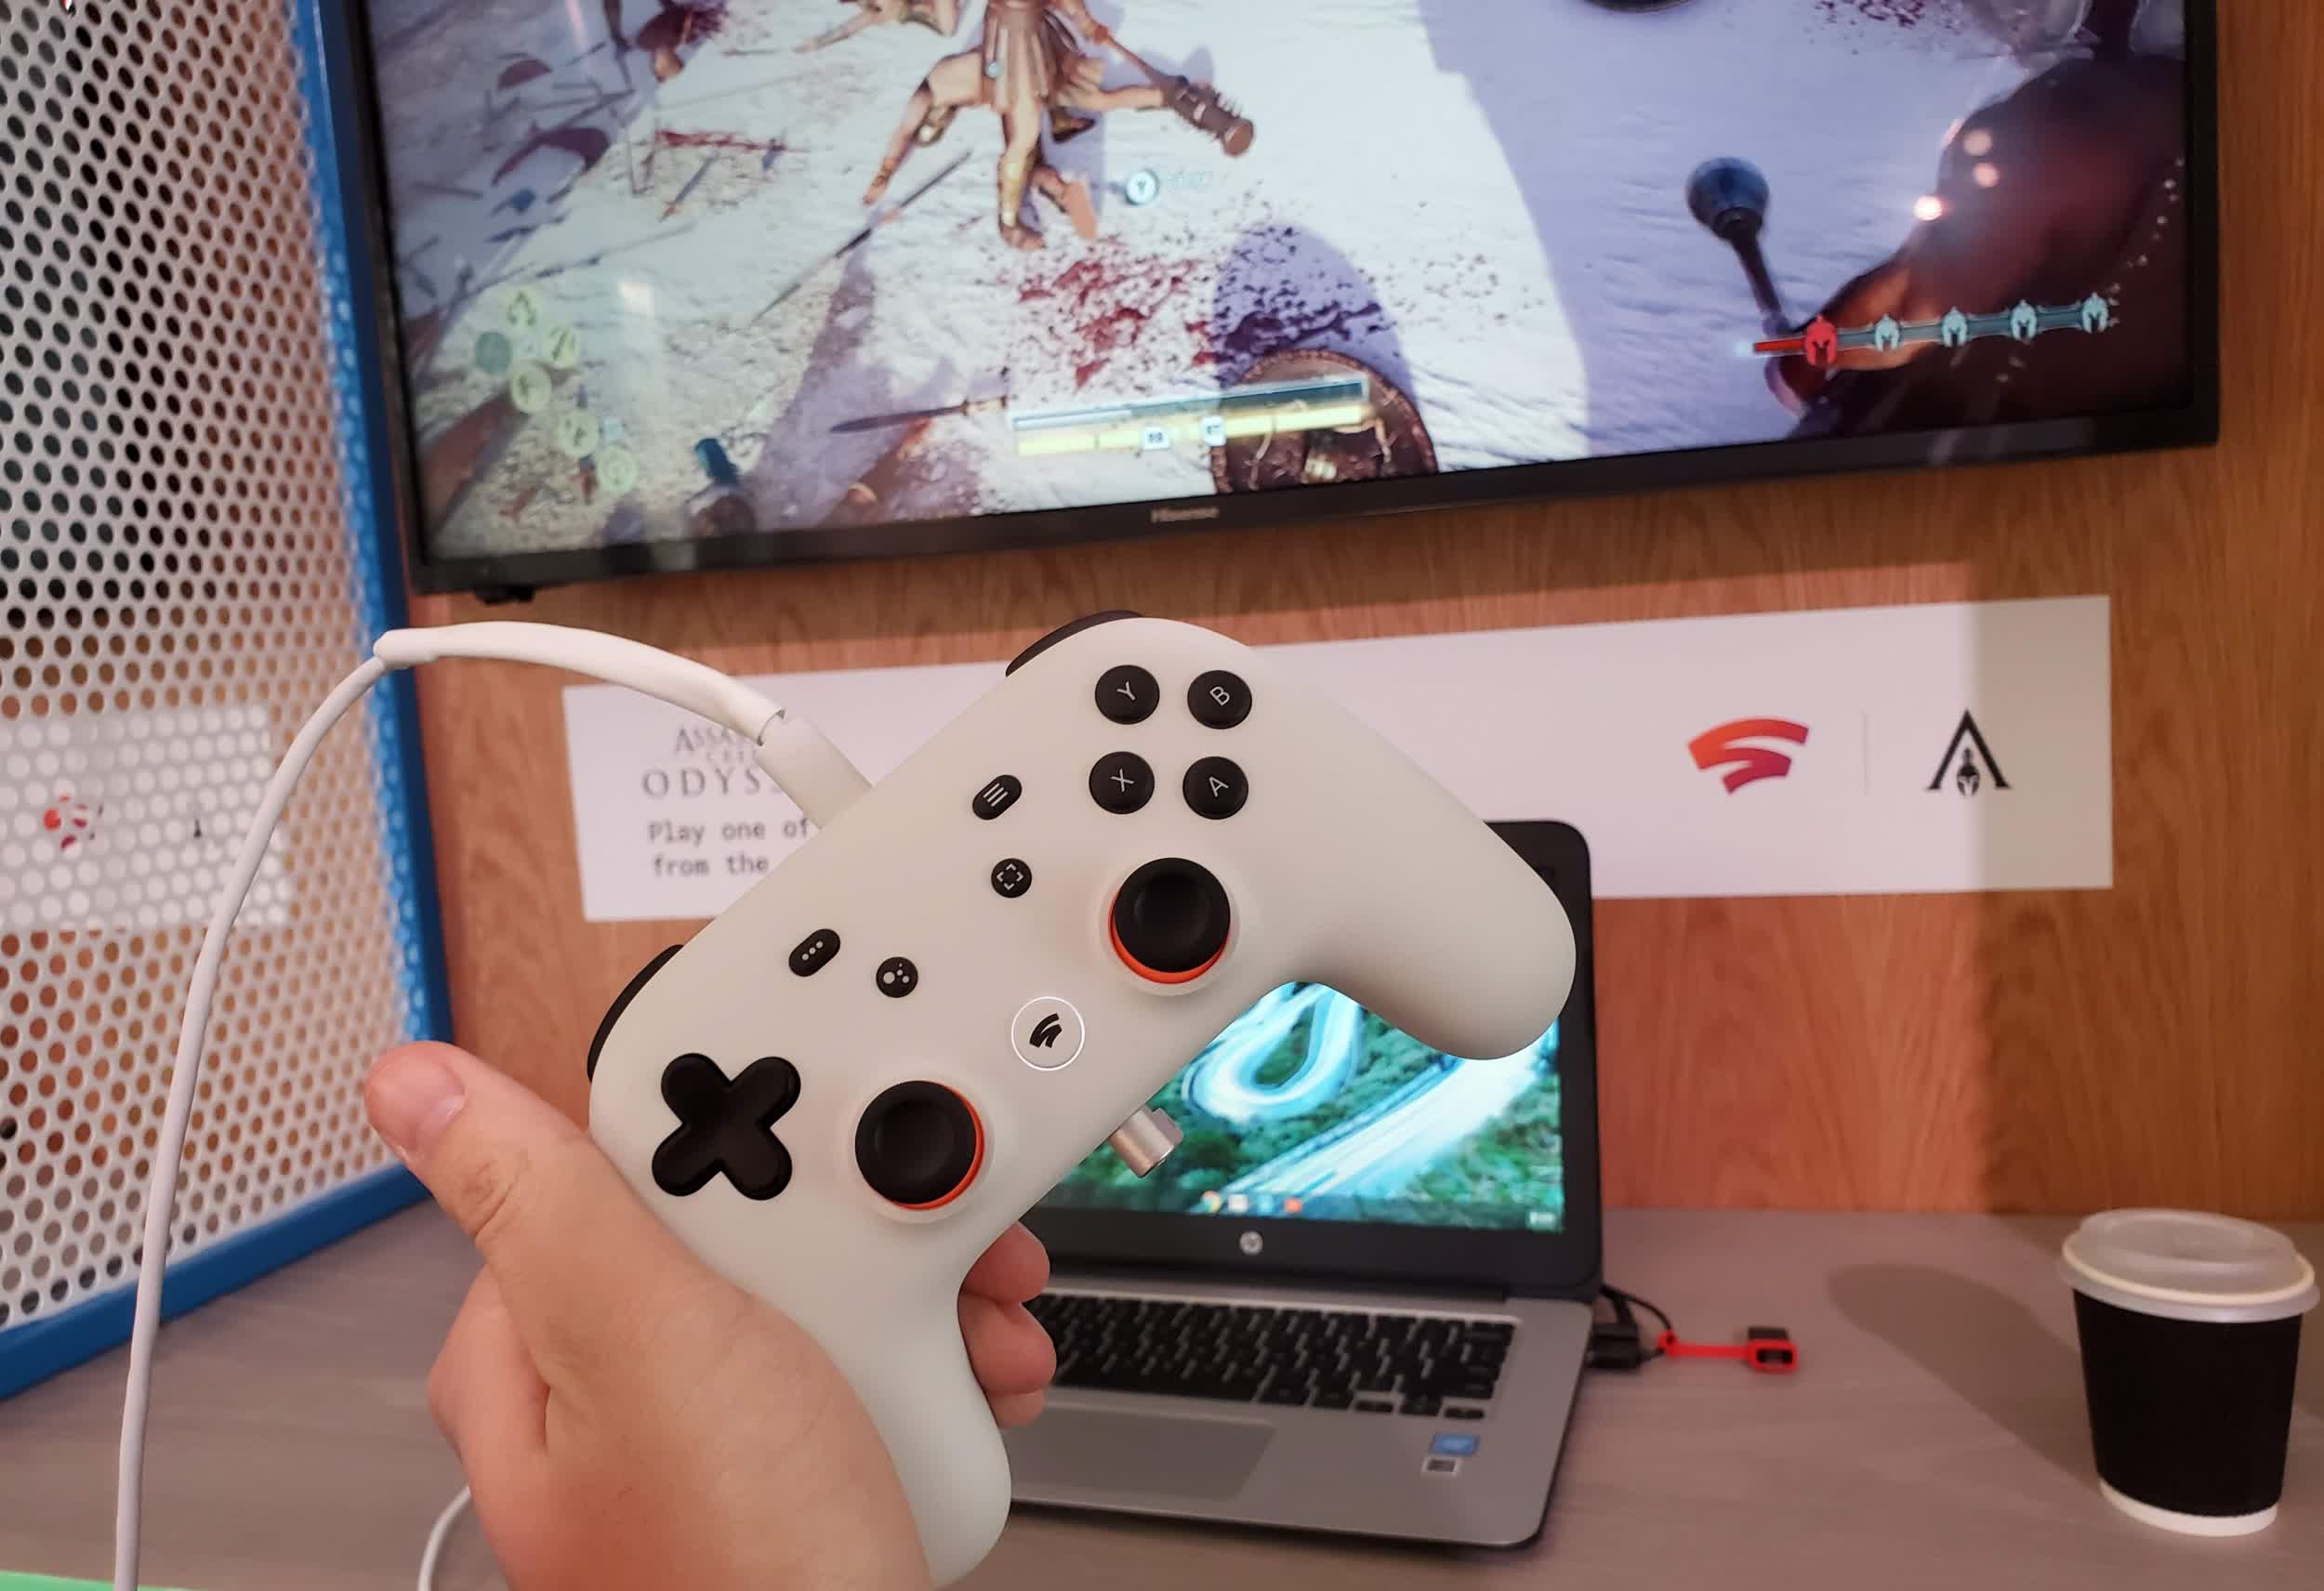 Stadia is getting more than 100 new games this year